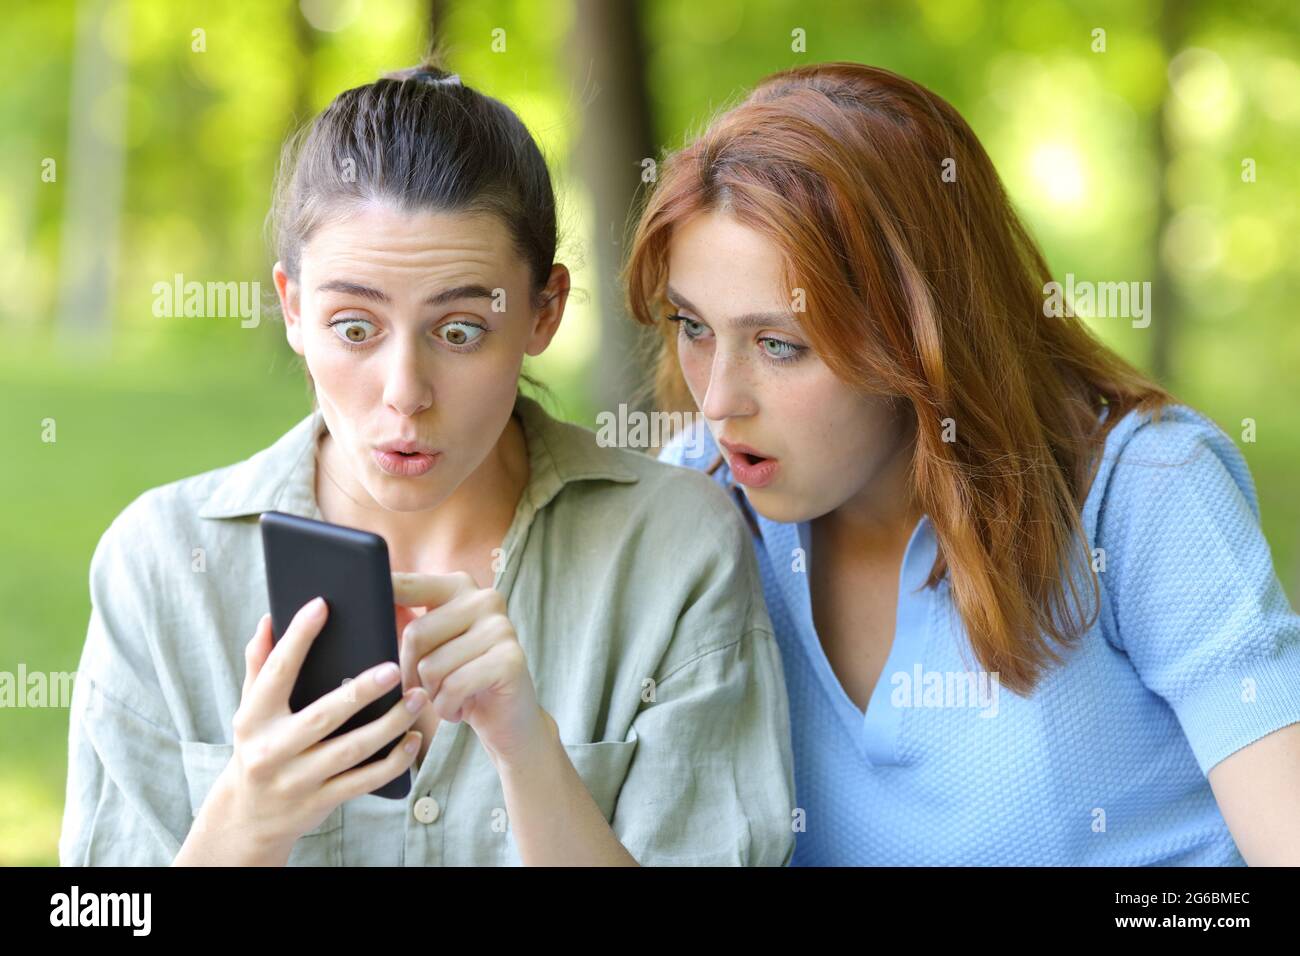 Two amazed women checking mobile phone content in a park Stock Photo